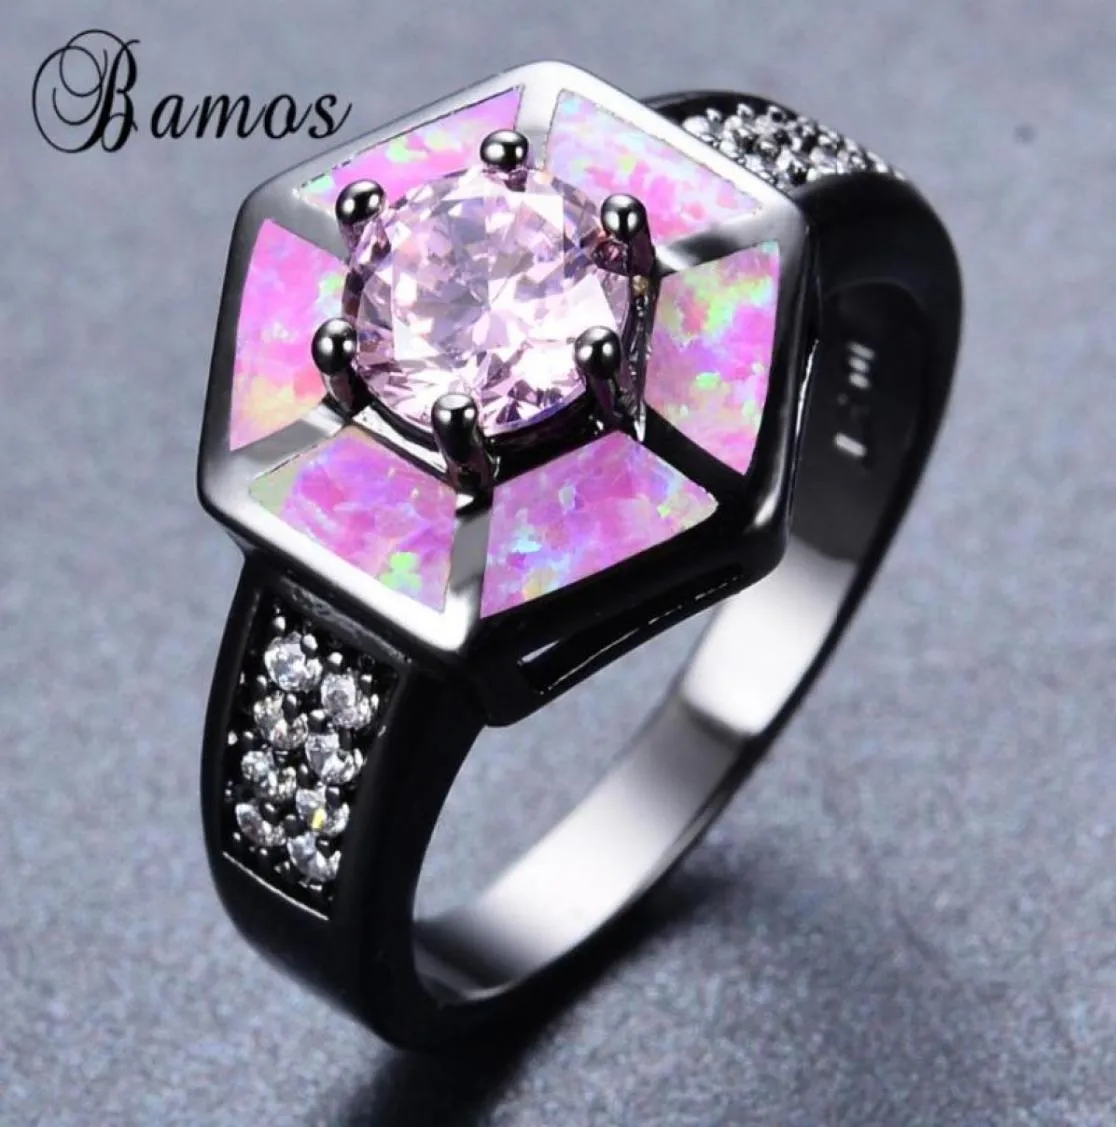 Bröllopsringar Bamos Romantic Pink Fire Opal for Women Lady Black Gold Filled Party Engagement Promise Ring Anillos RB10573848058